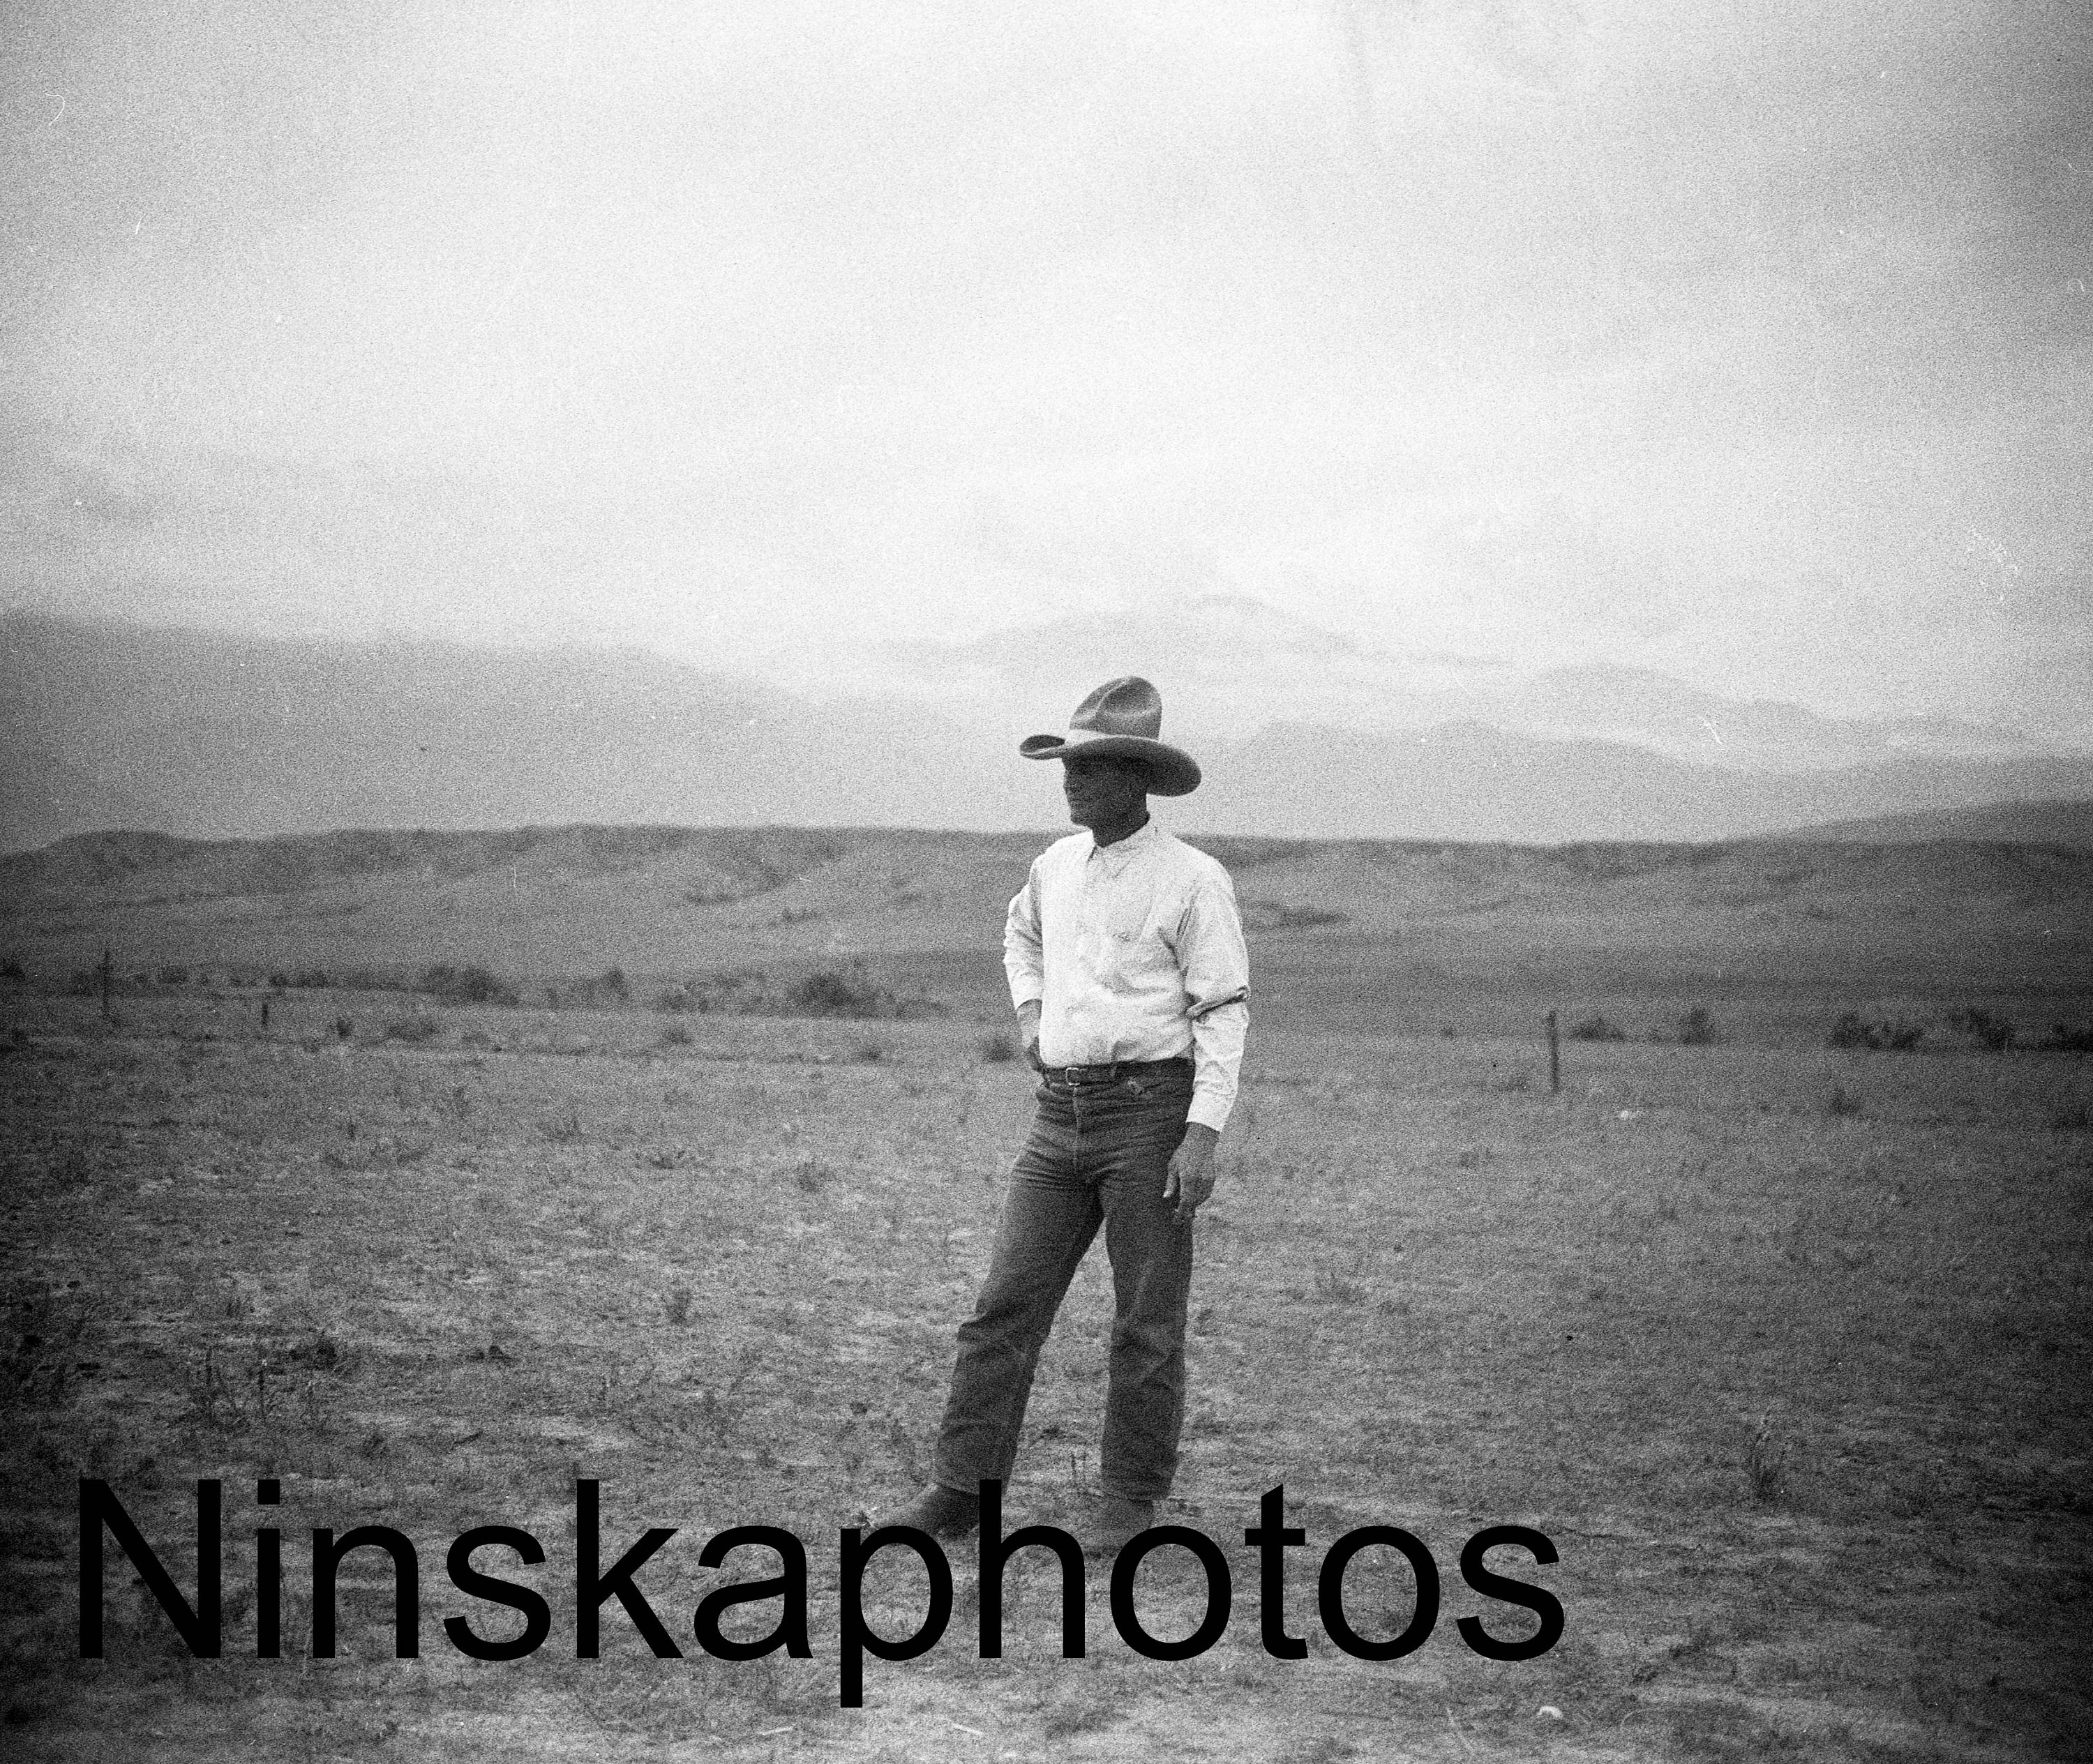 Colorado United States State Fair Colorado Springs 1926 1920s antique photo reprint Local History At the Rodeo Ground Rodeo Rider